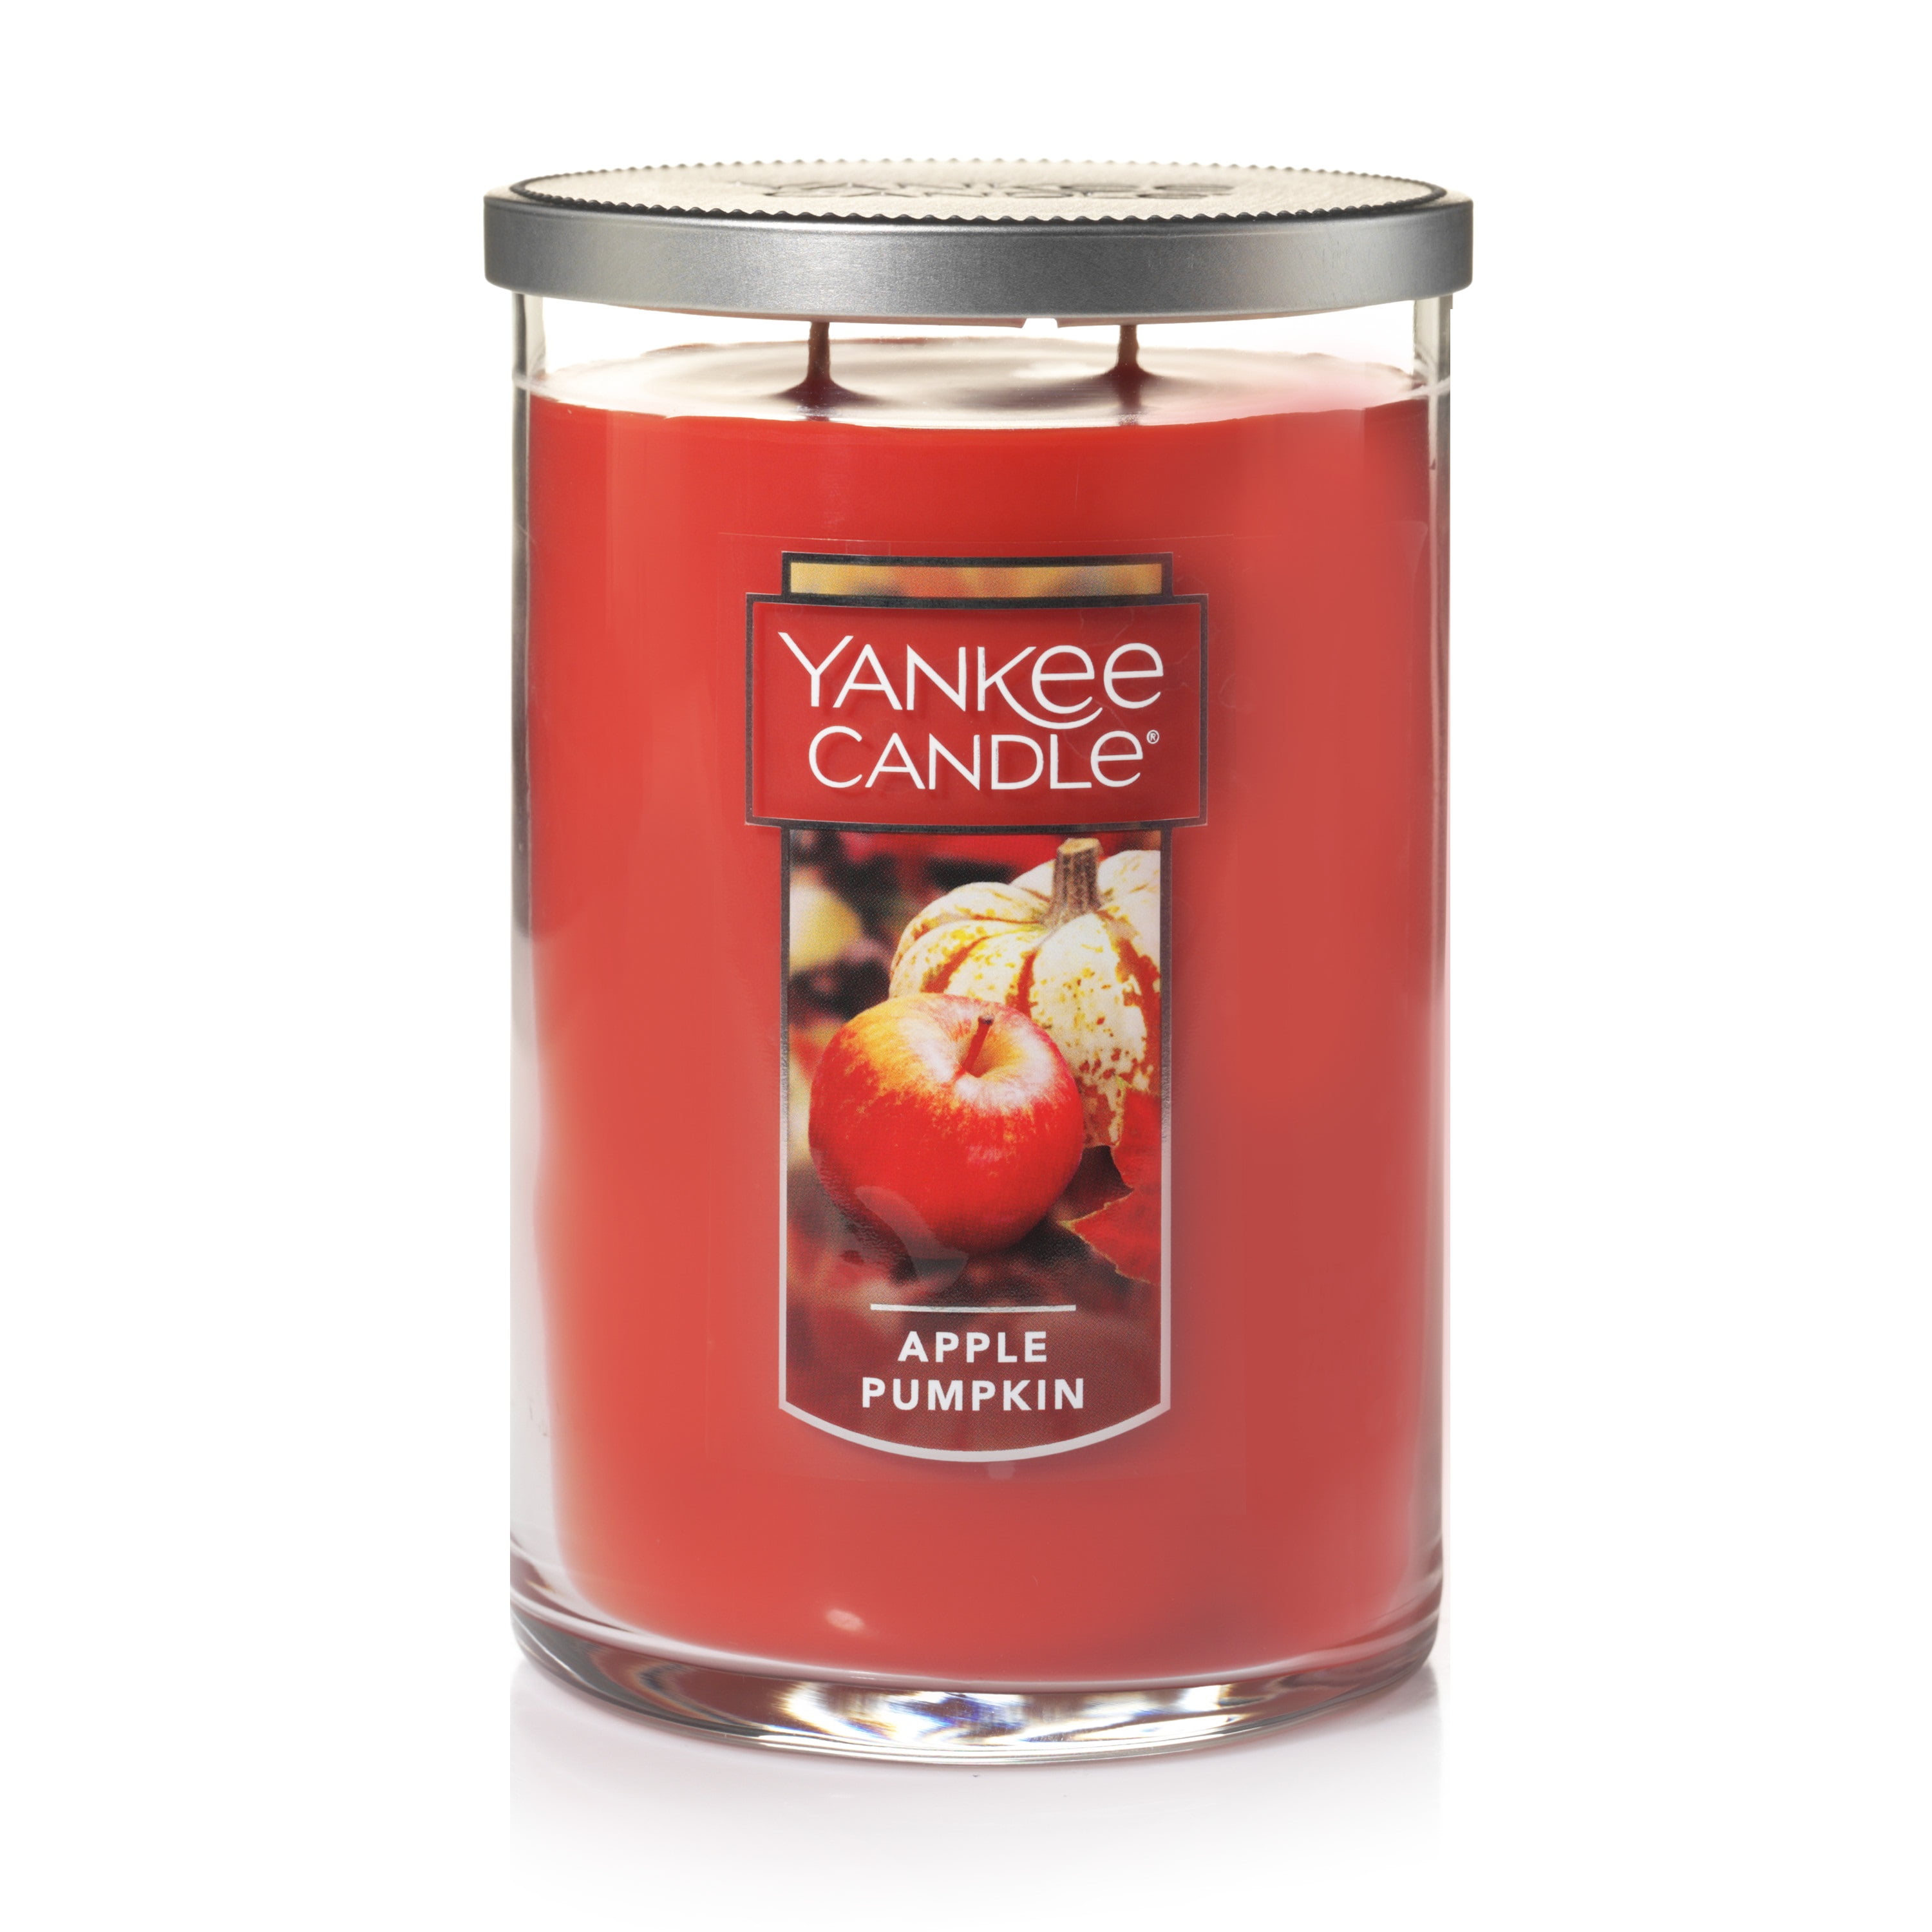 NEW Yankee Candle 3.7 oz Jar Candles ~ Assorted Scents You Choose ~ Never Burned 